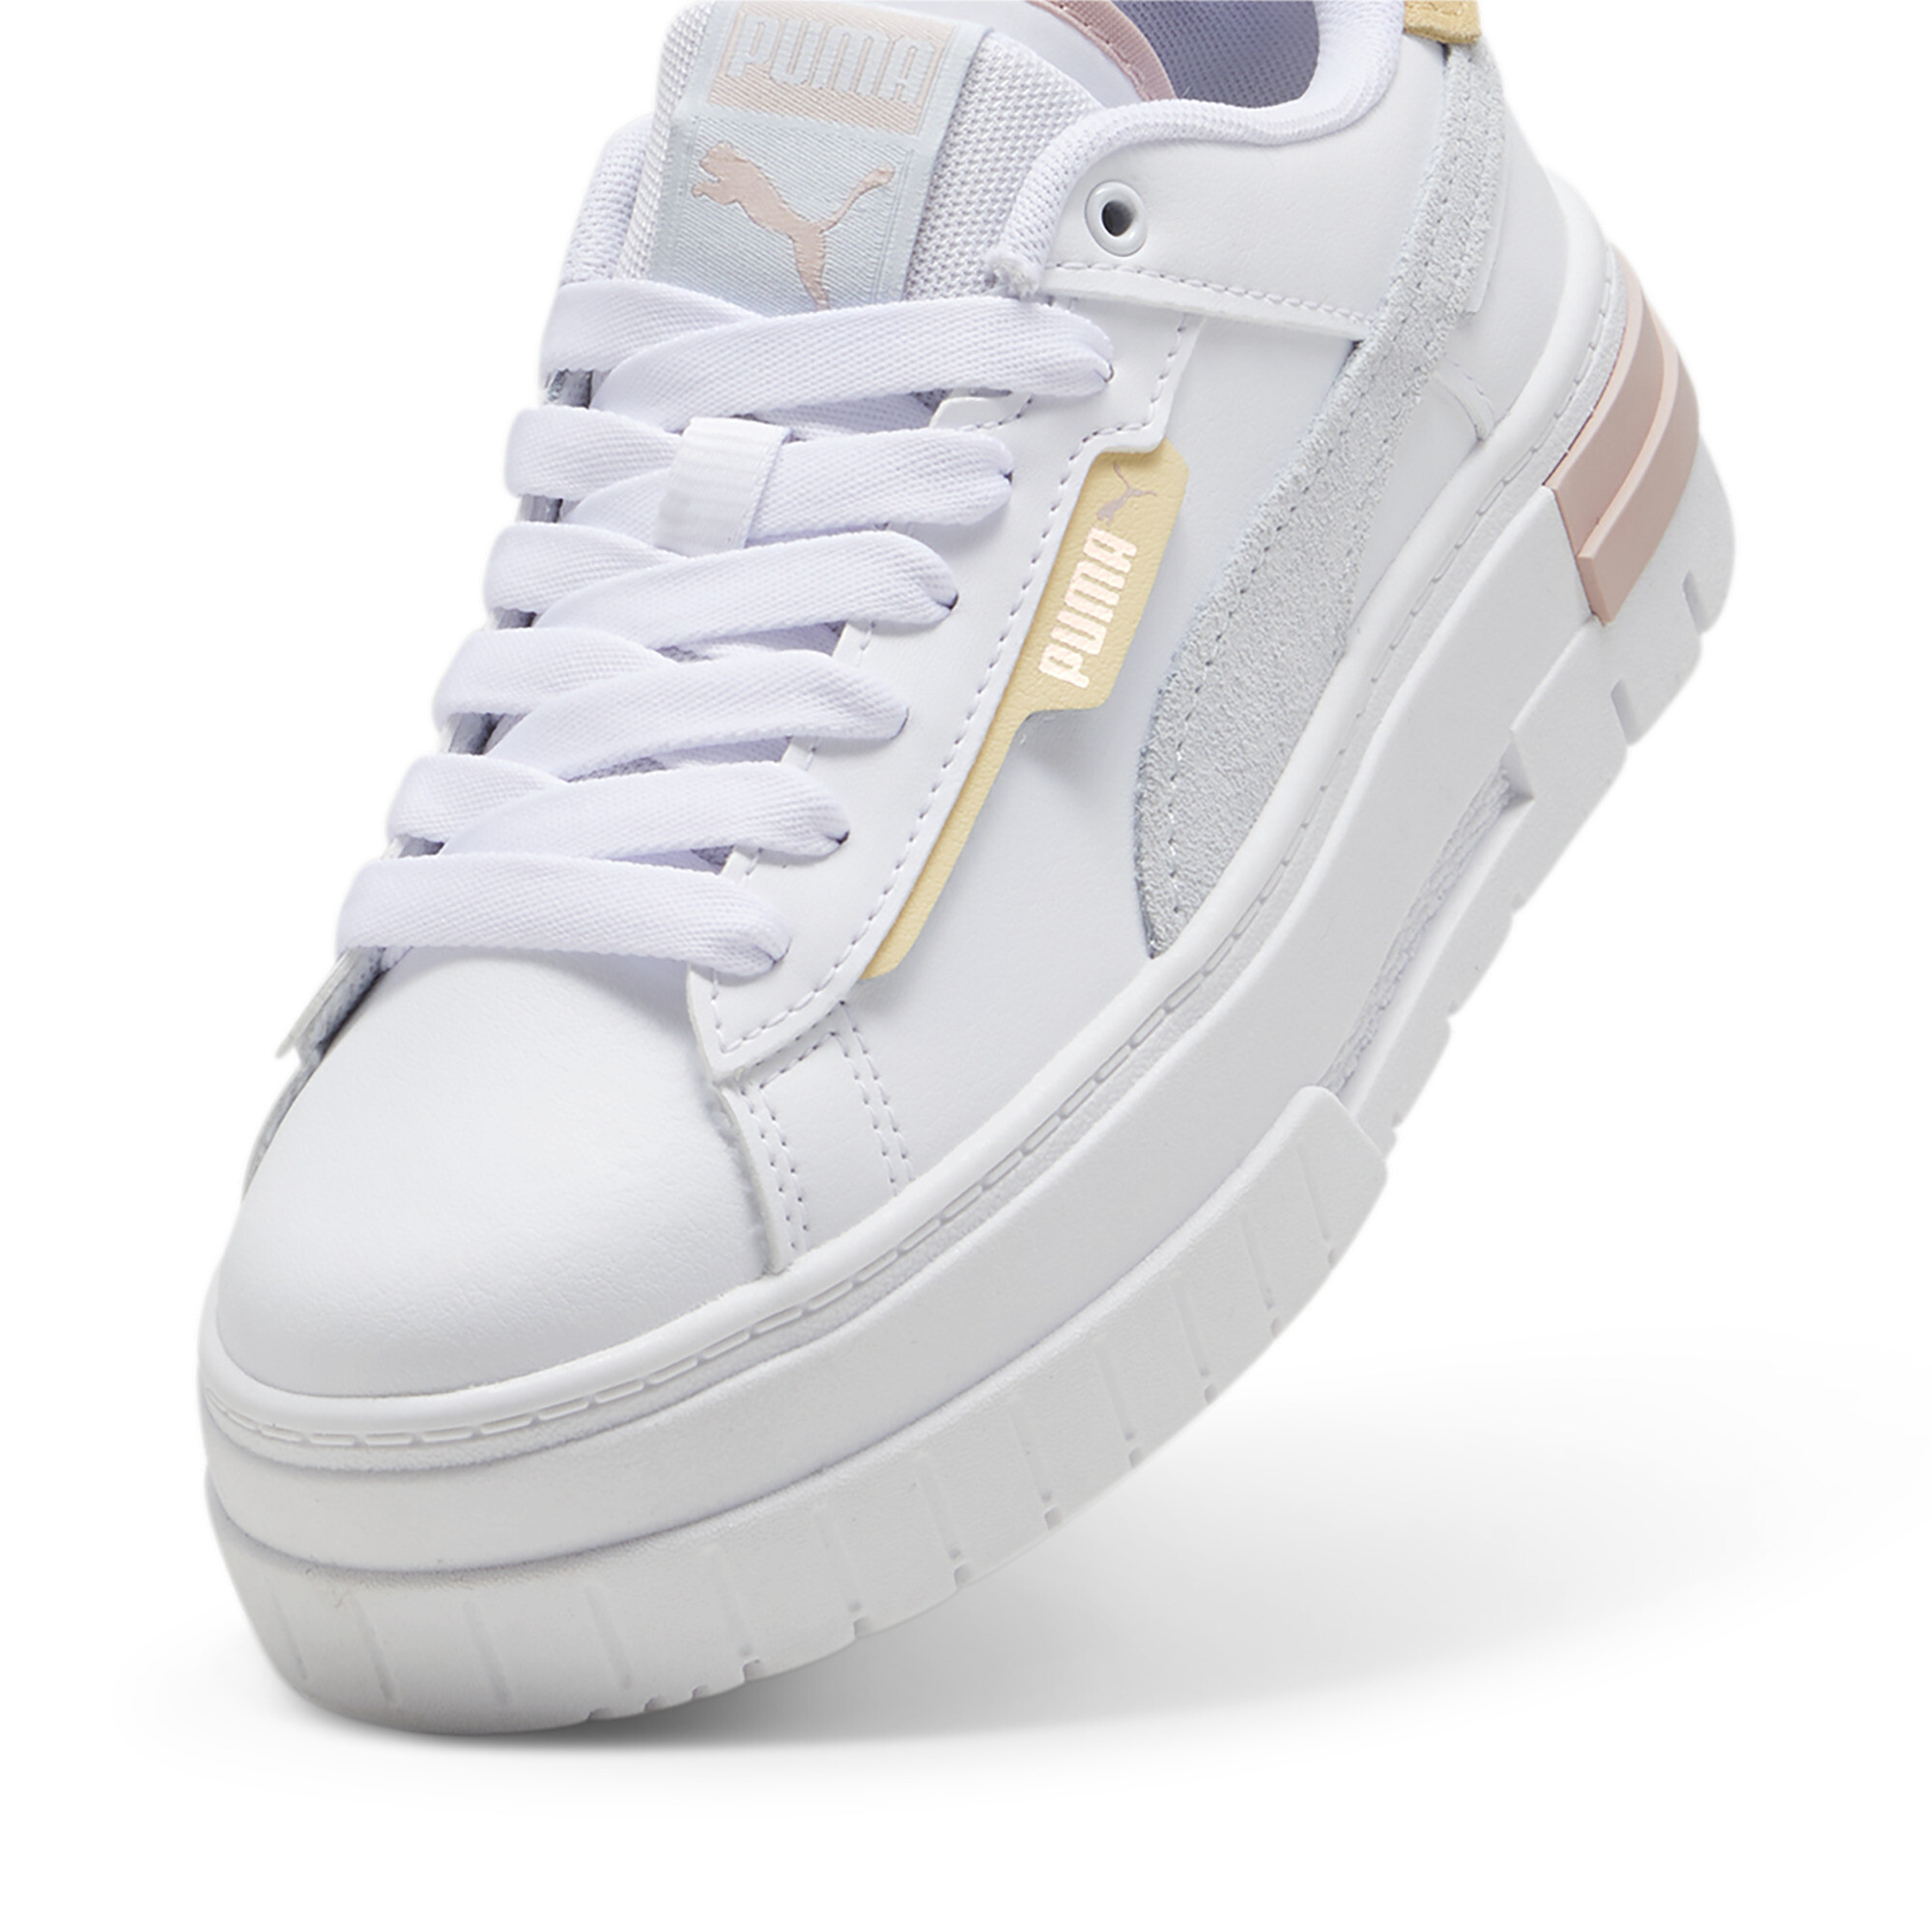 Women's Puma Mayze Crashed Youth Sneakers, White, Size 35.5, Shoes